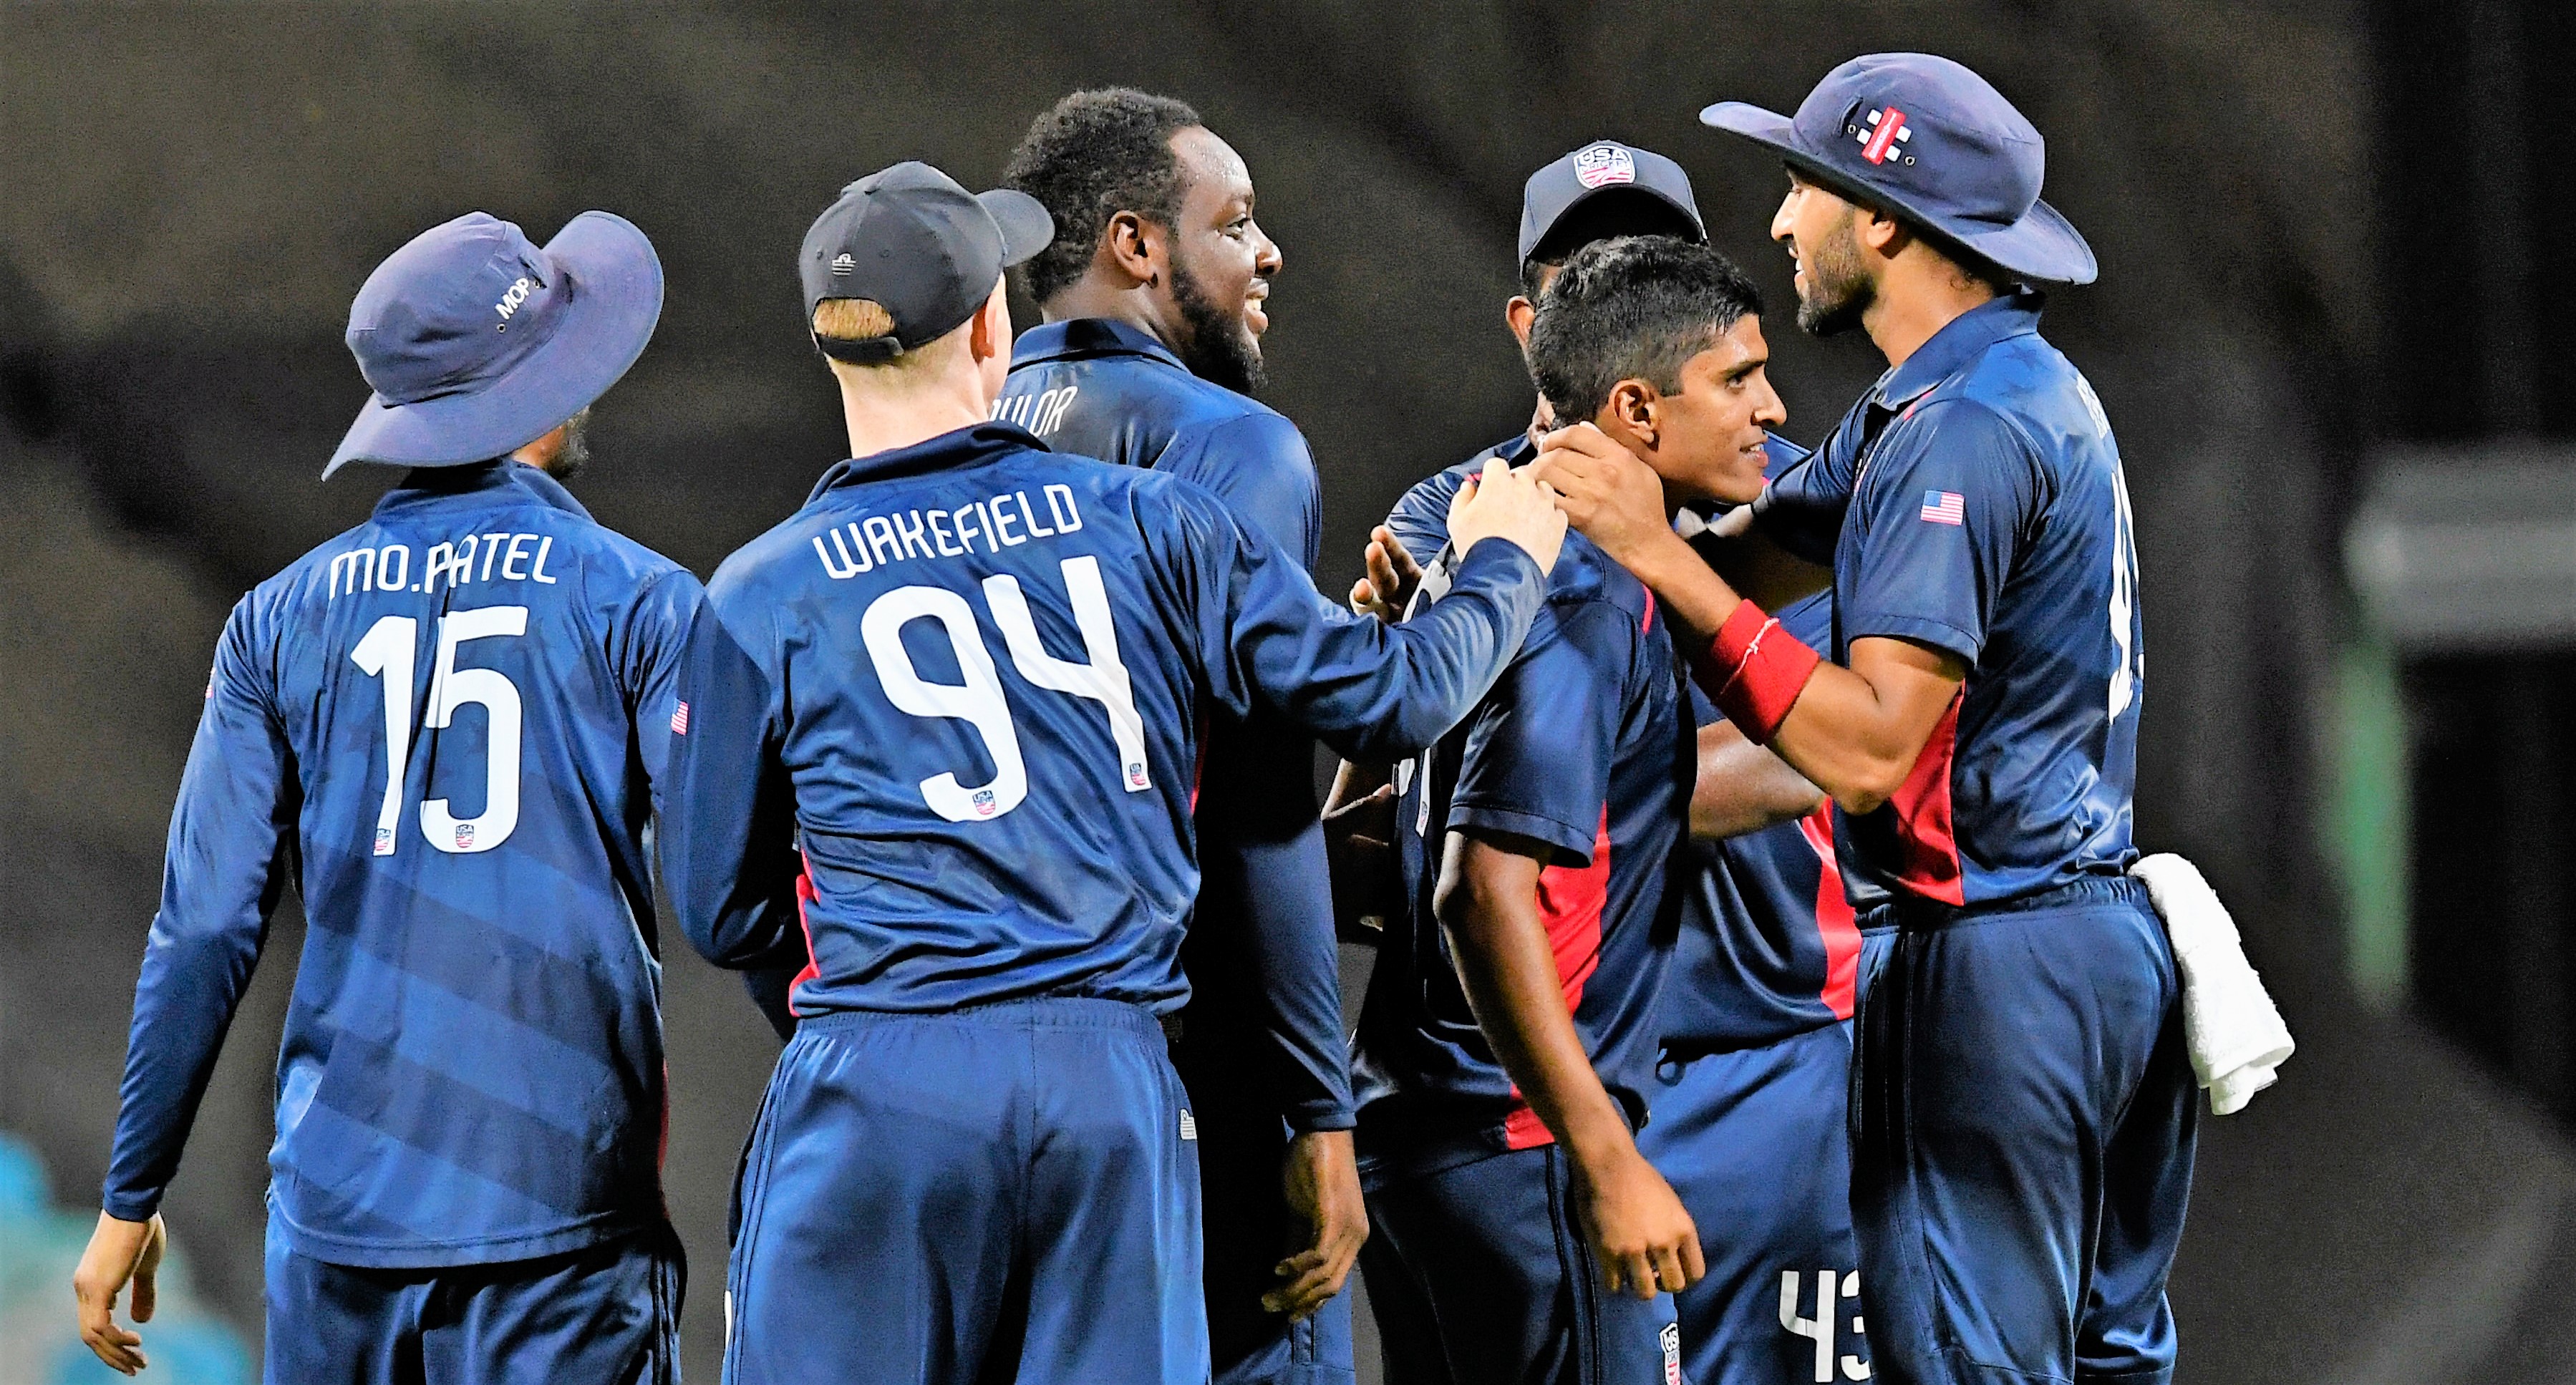 USA light up Kensington Oval with dazzling win over Leewards